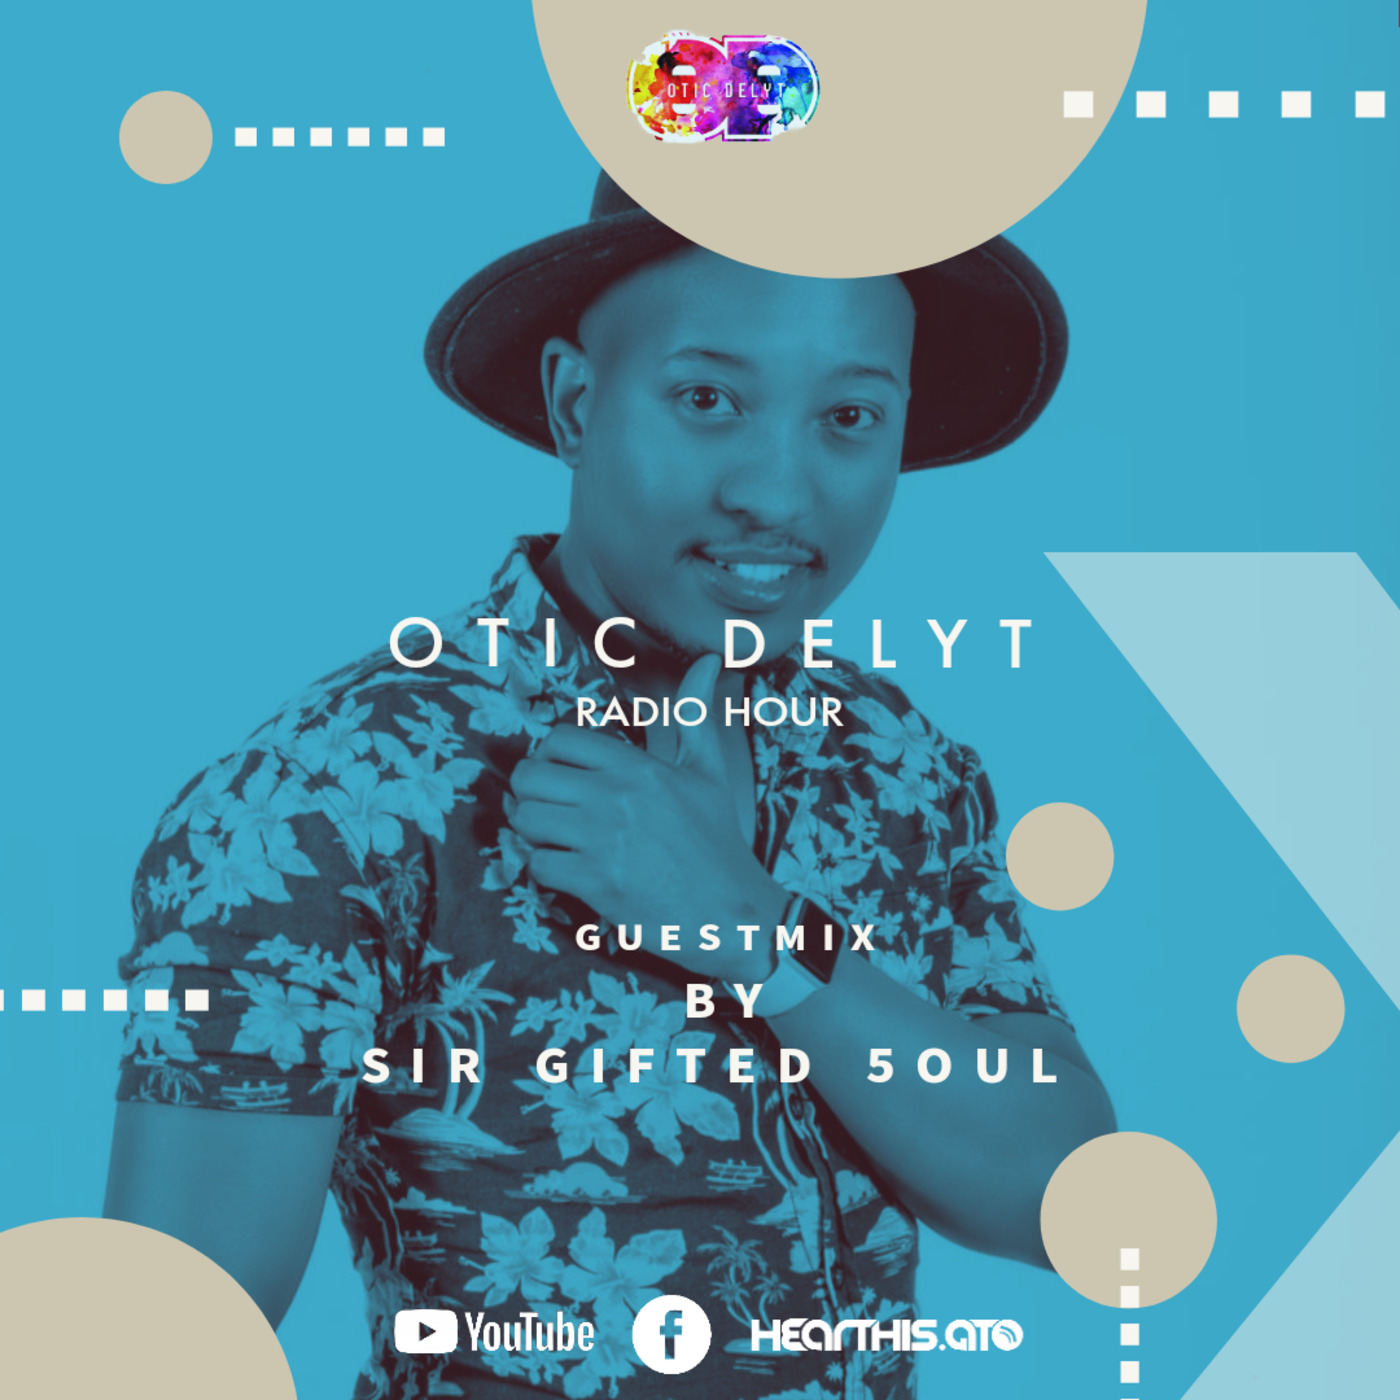 Otic Delyt Radio Hour #065 Guest Mix by Sir Gifted 5oul